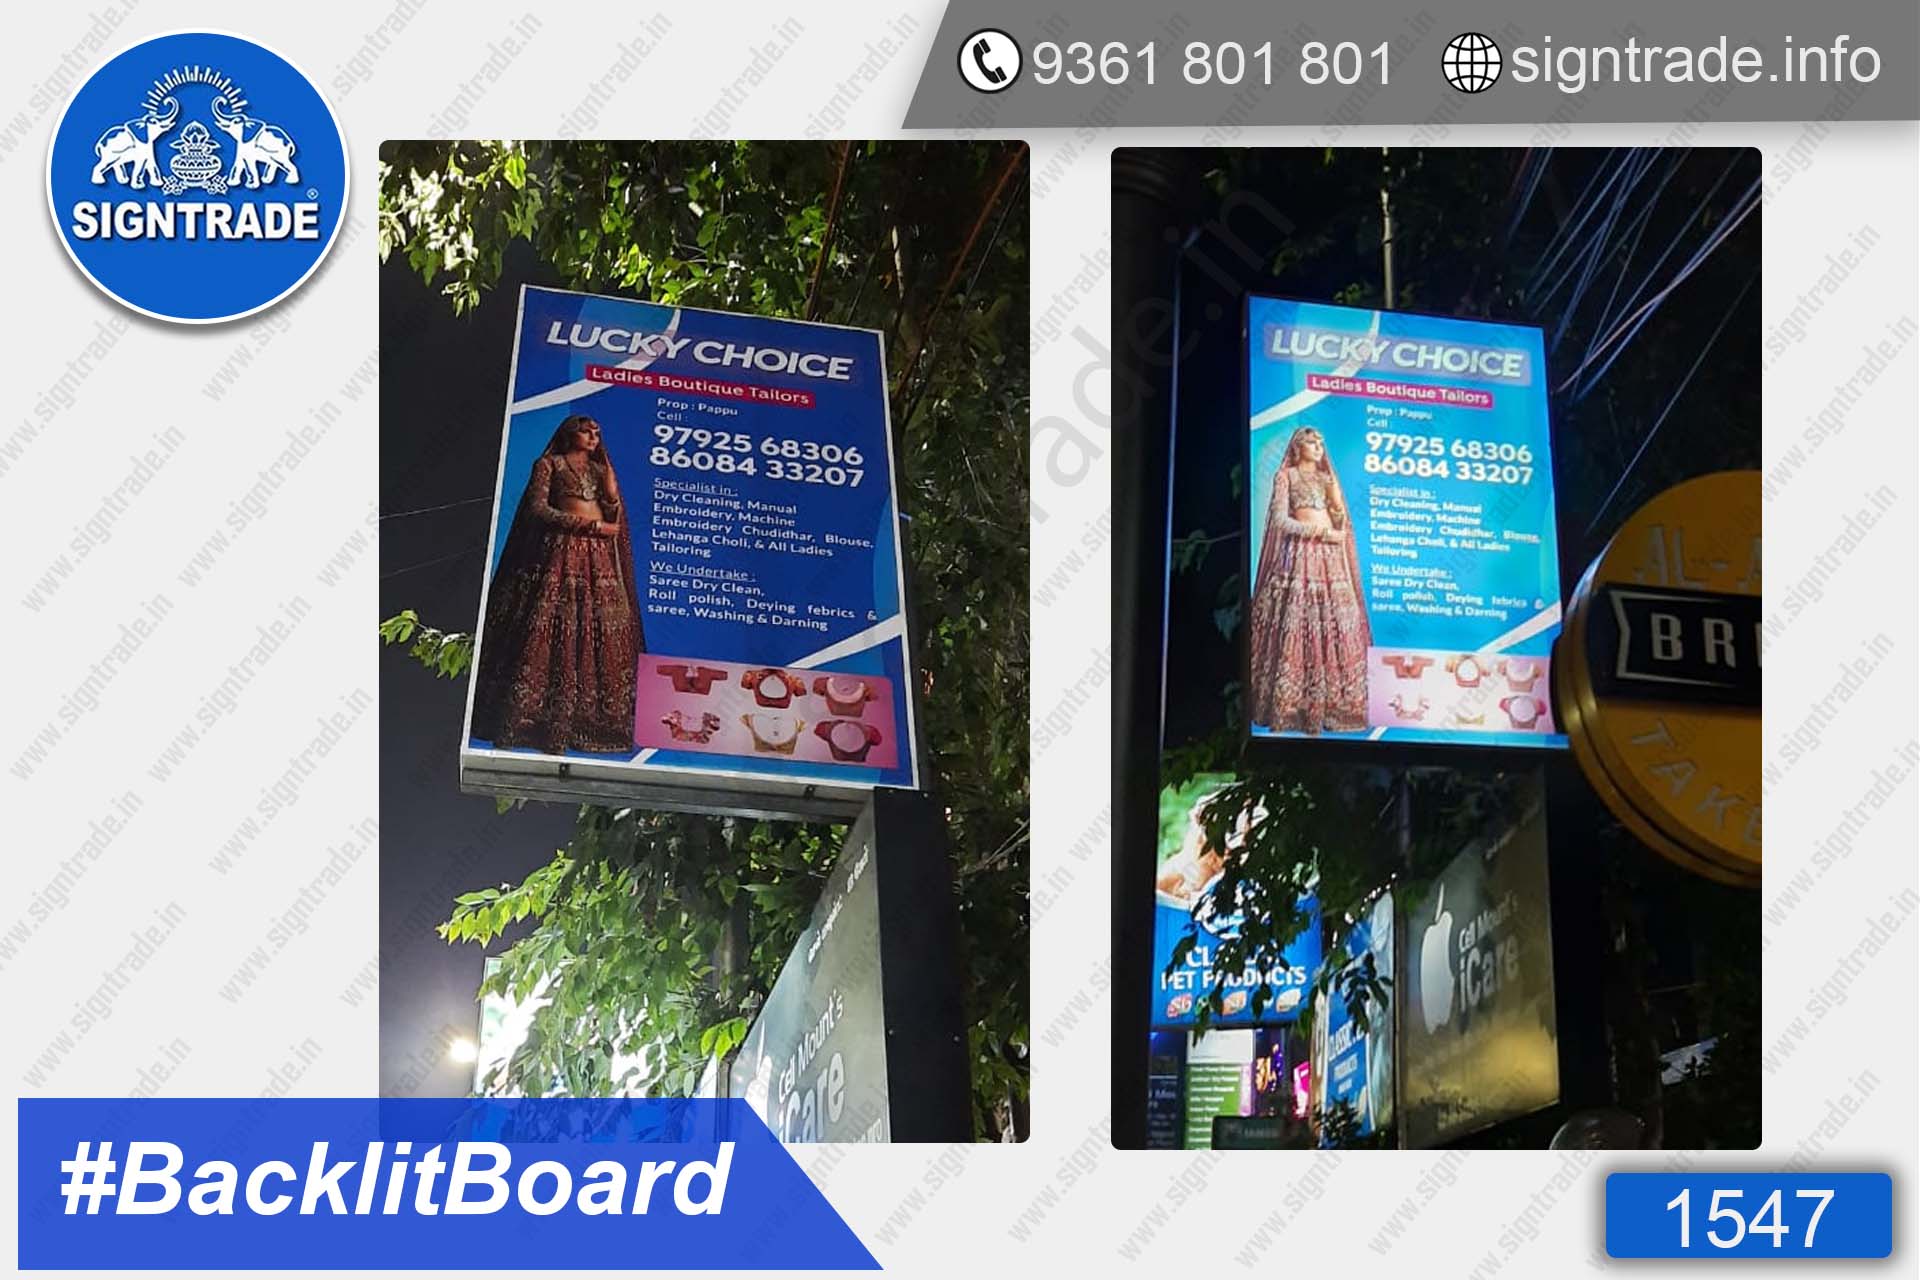 Lucky Choice Ladies Boutique Tailors - Chennai - SIGNTRADE - Digital Printing Service, Backlit Flex Board Manufacturers in Chennai